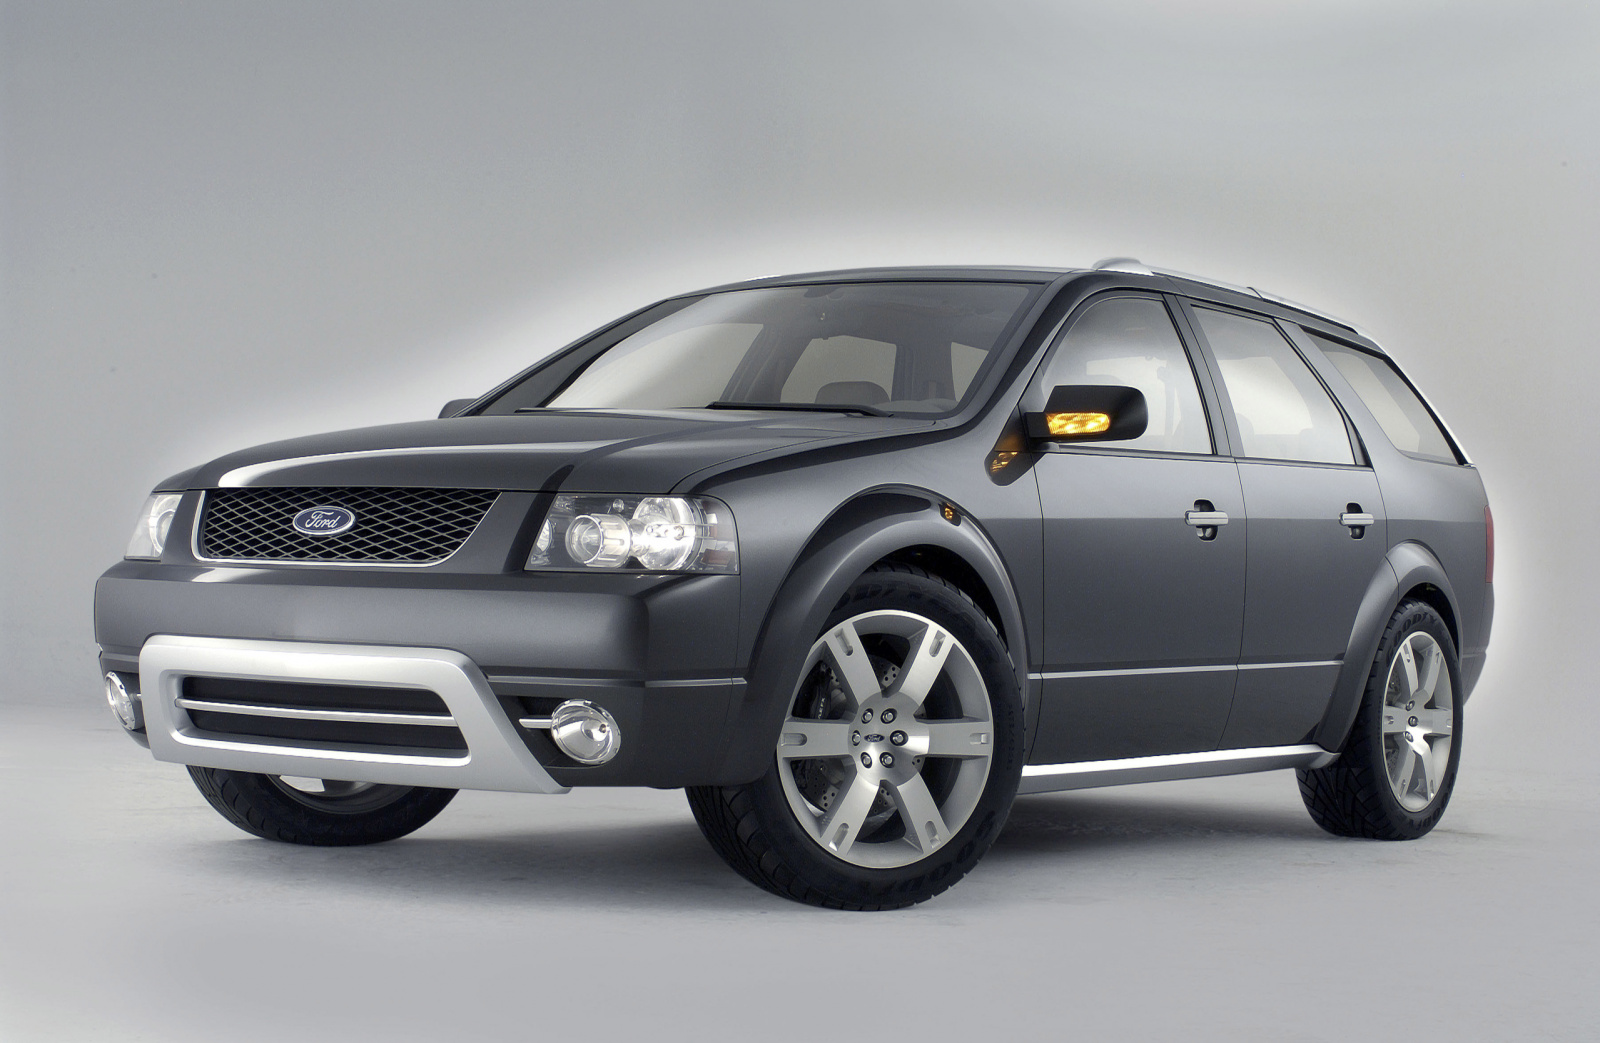 Ford Freestyle Fx Concept - Foto eines Ford Concept-Cars